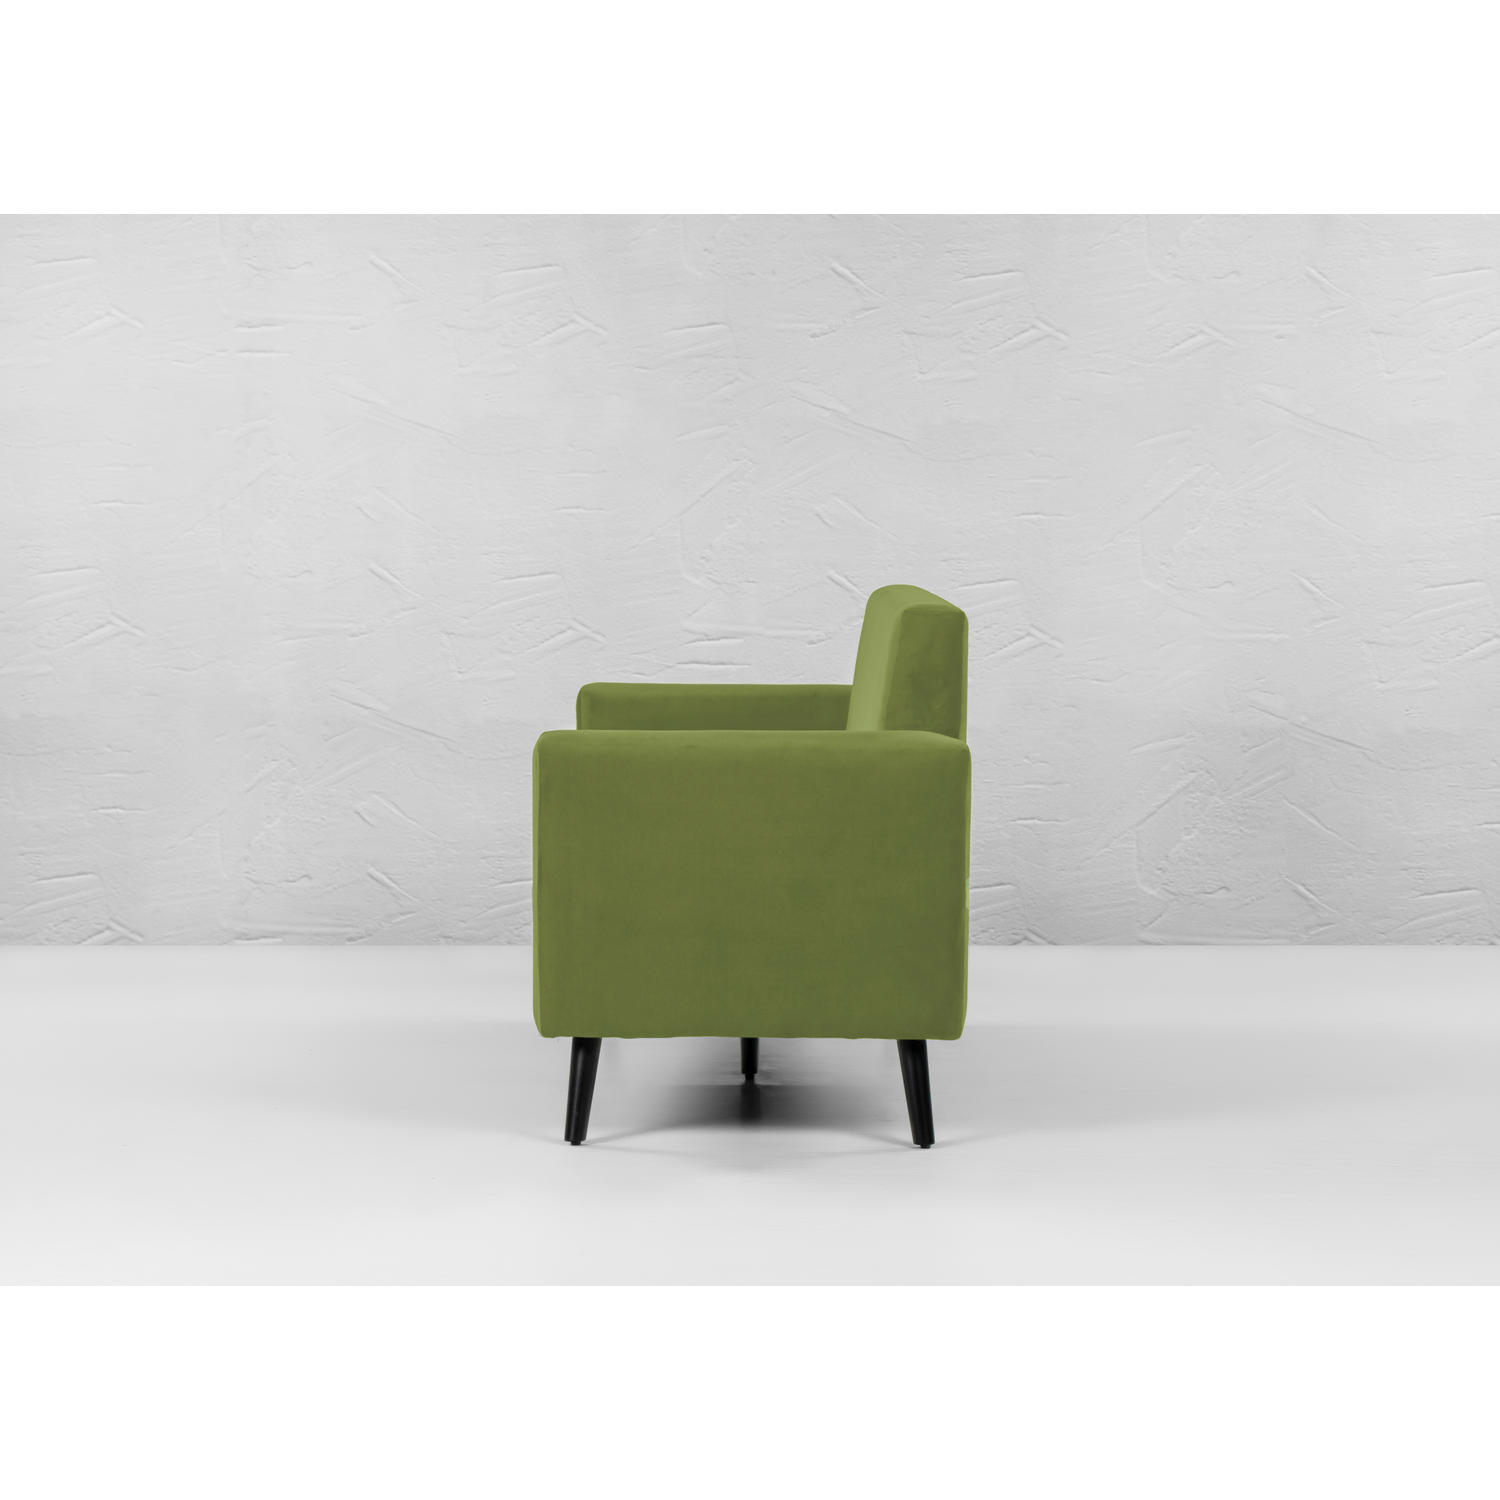 Cairo Wooden 3 Seater Sofa in Velvet Fabric in Green Color